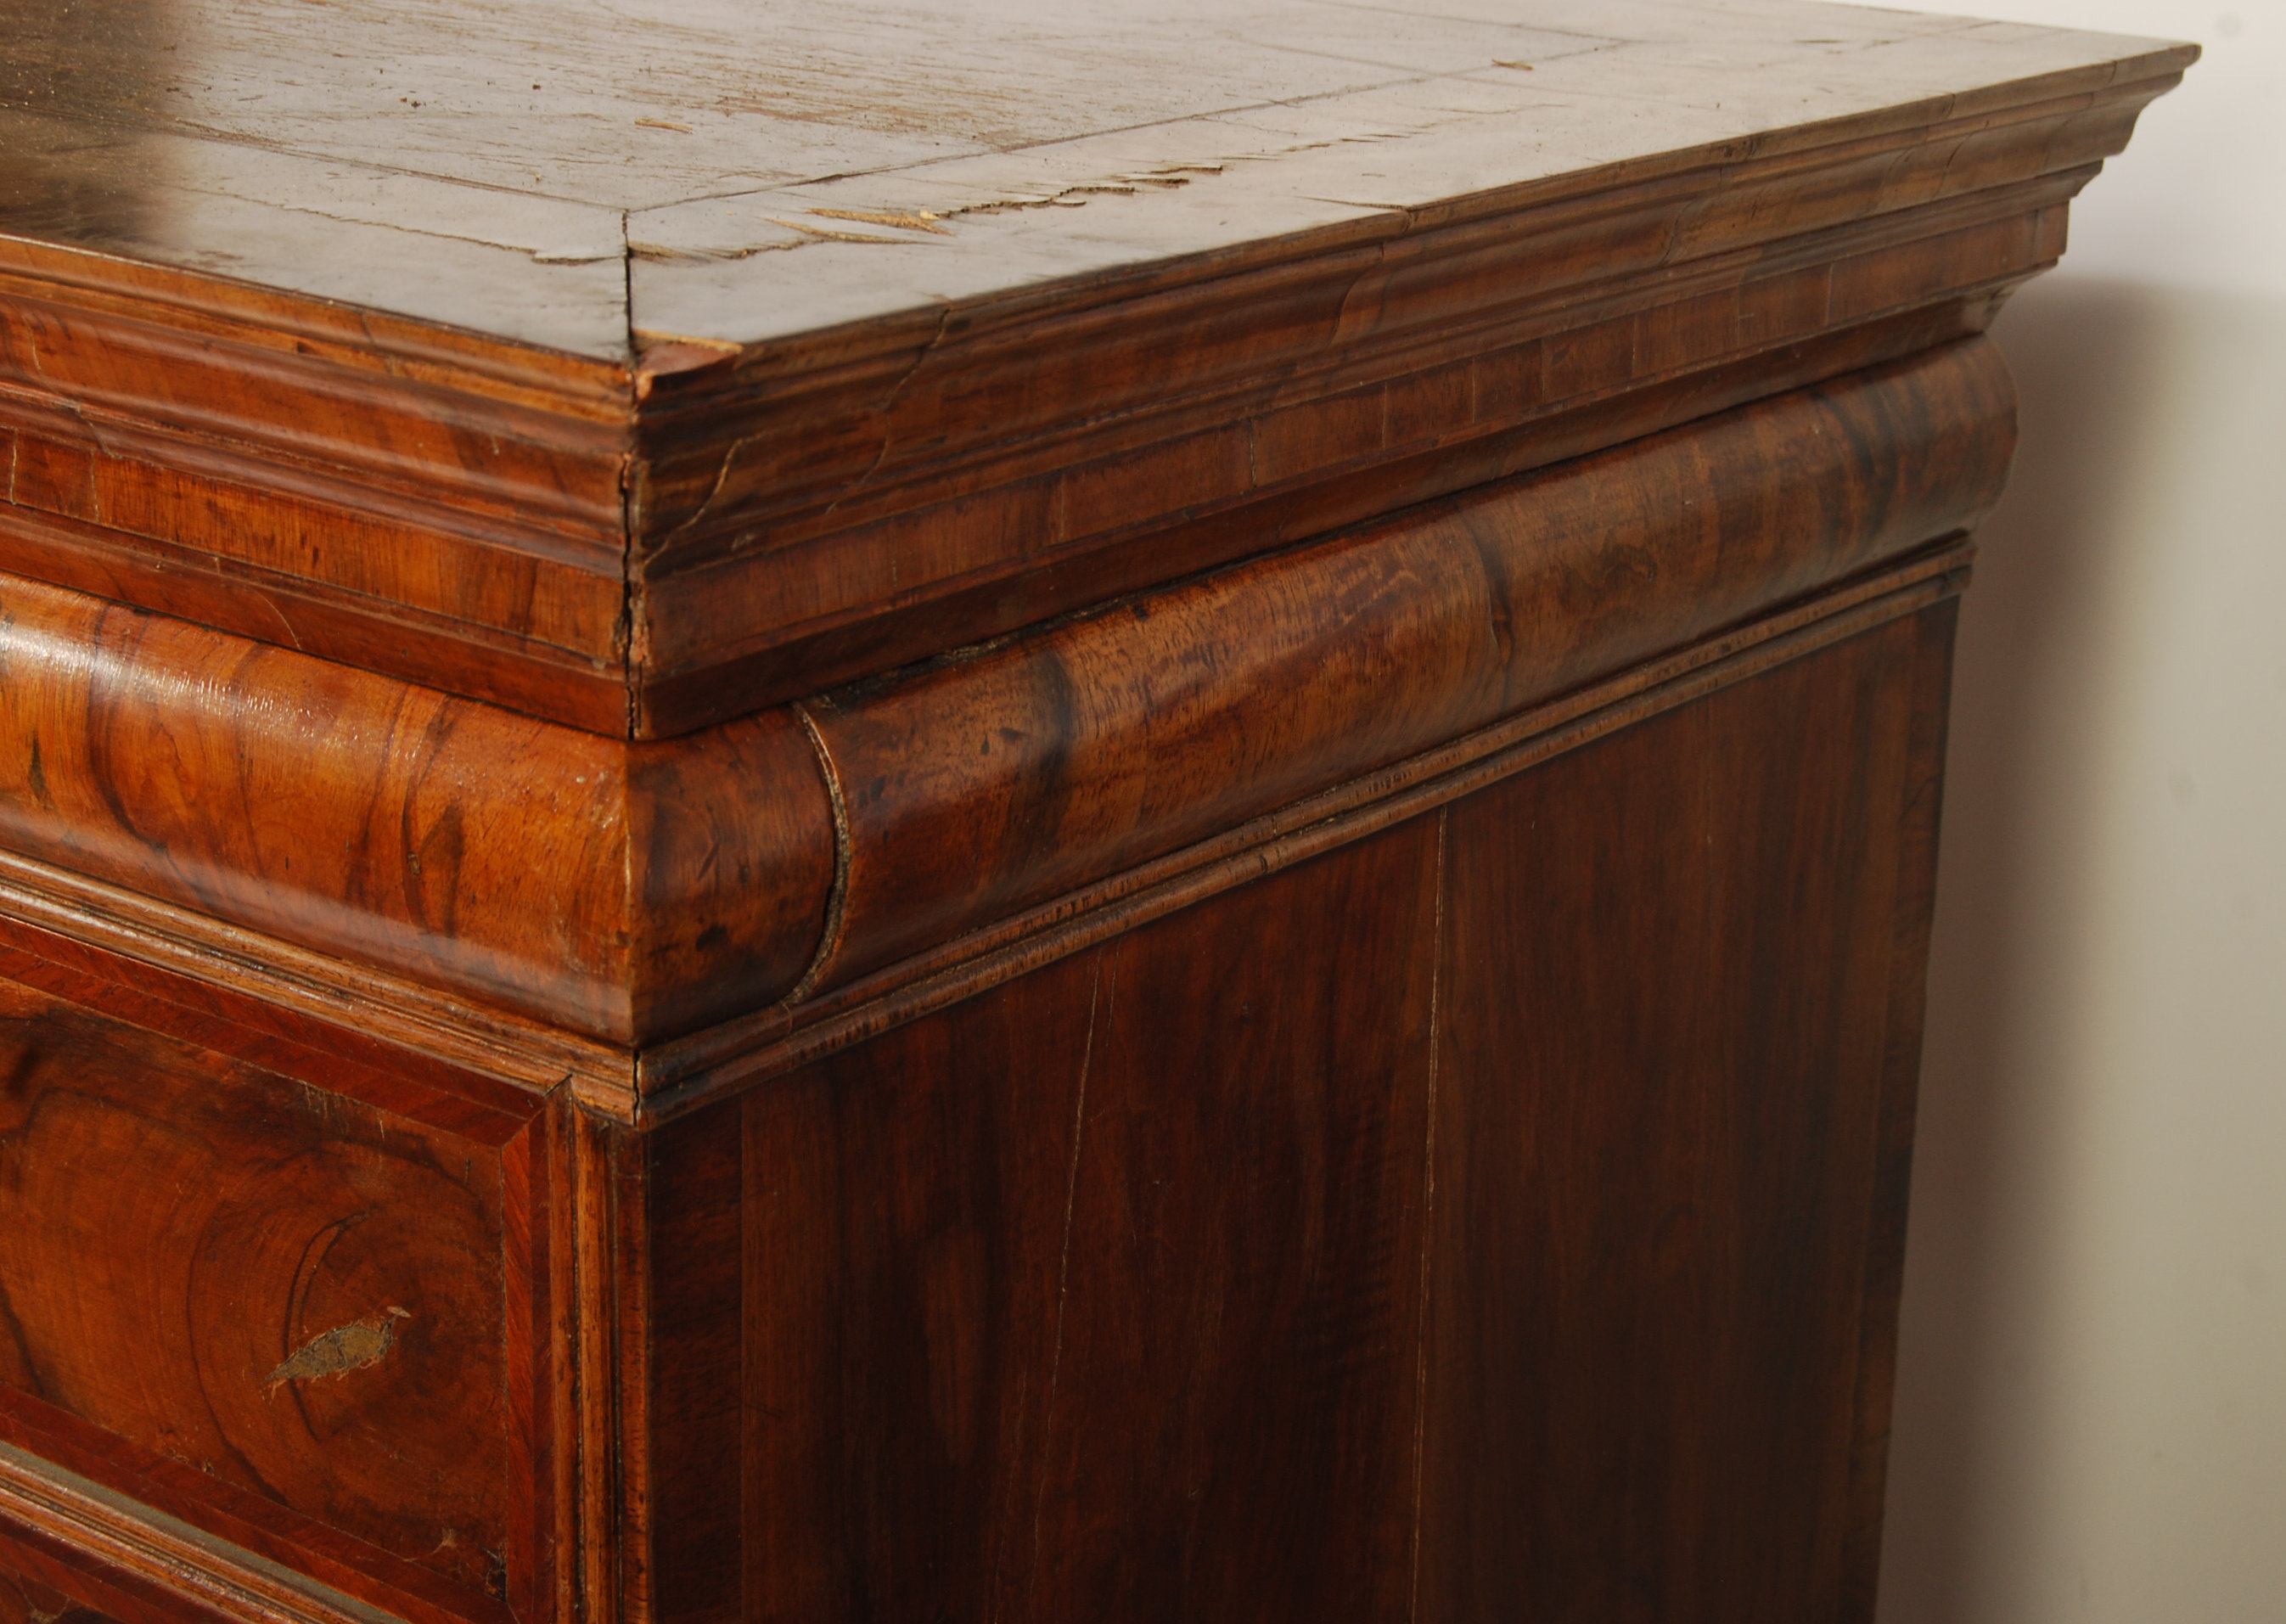 LATE 17TH / 18TH CENTURY WALNUT CHEST ON STAND - Image 7 of 11